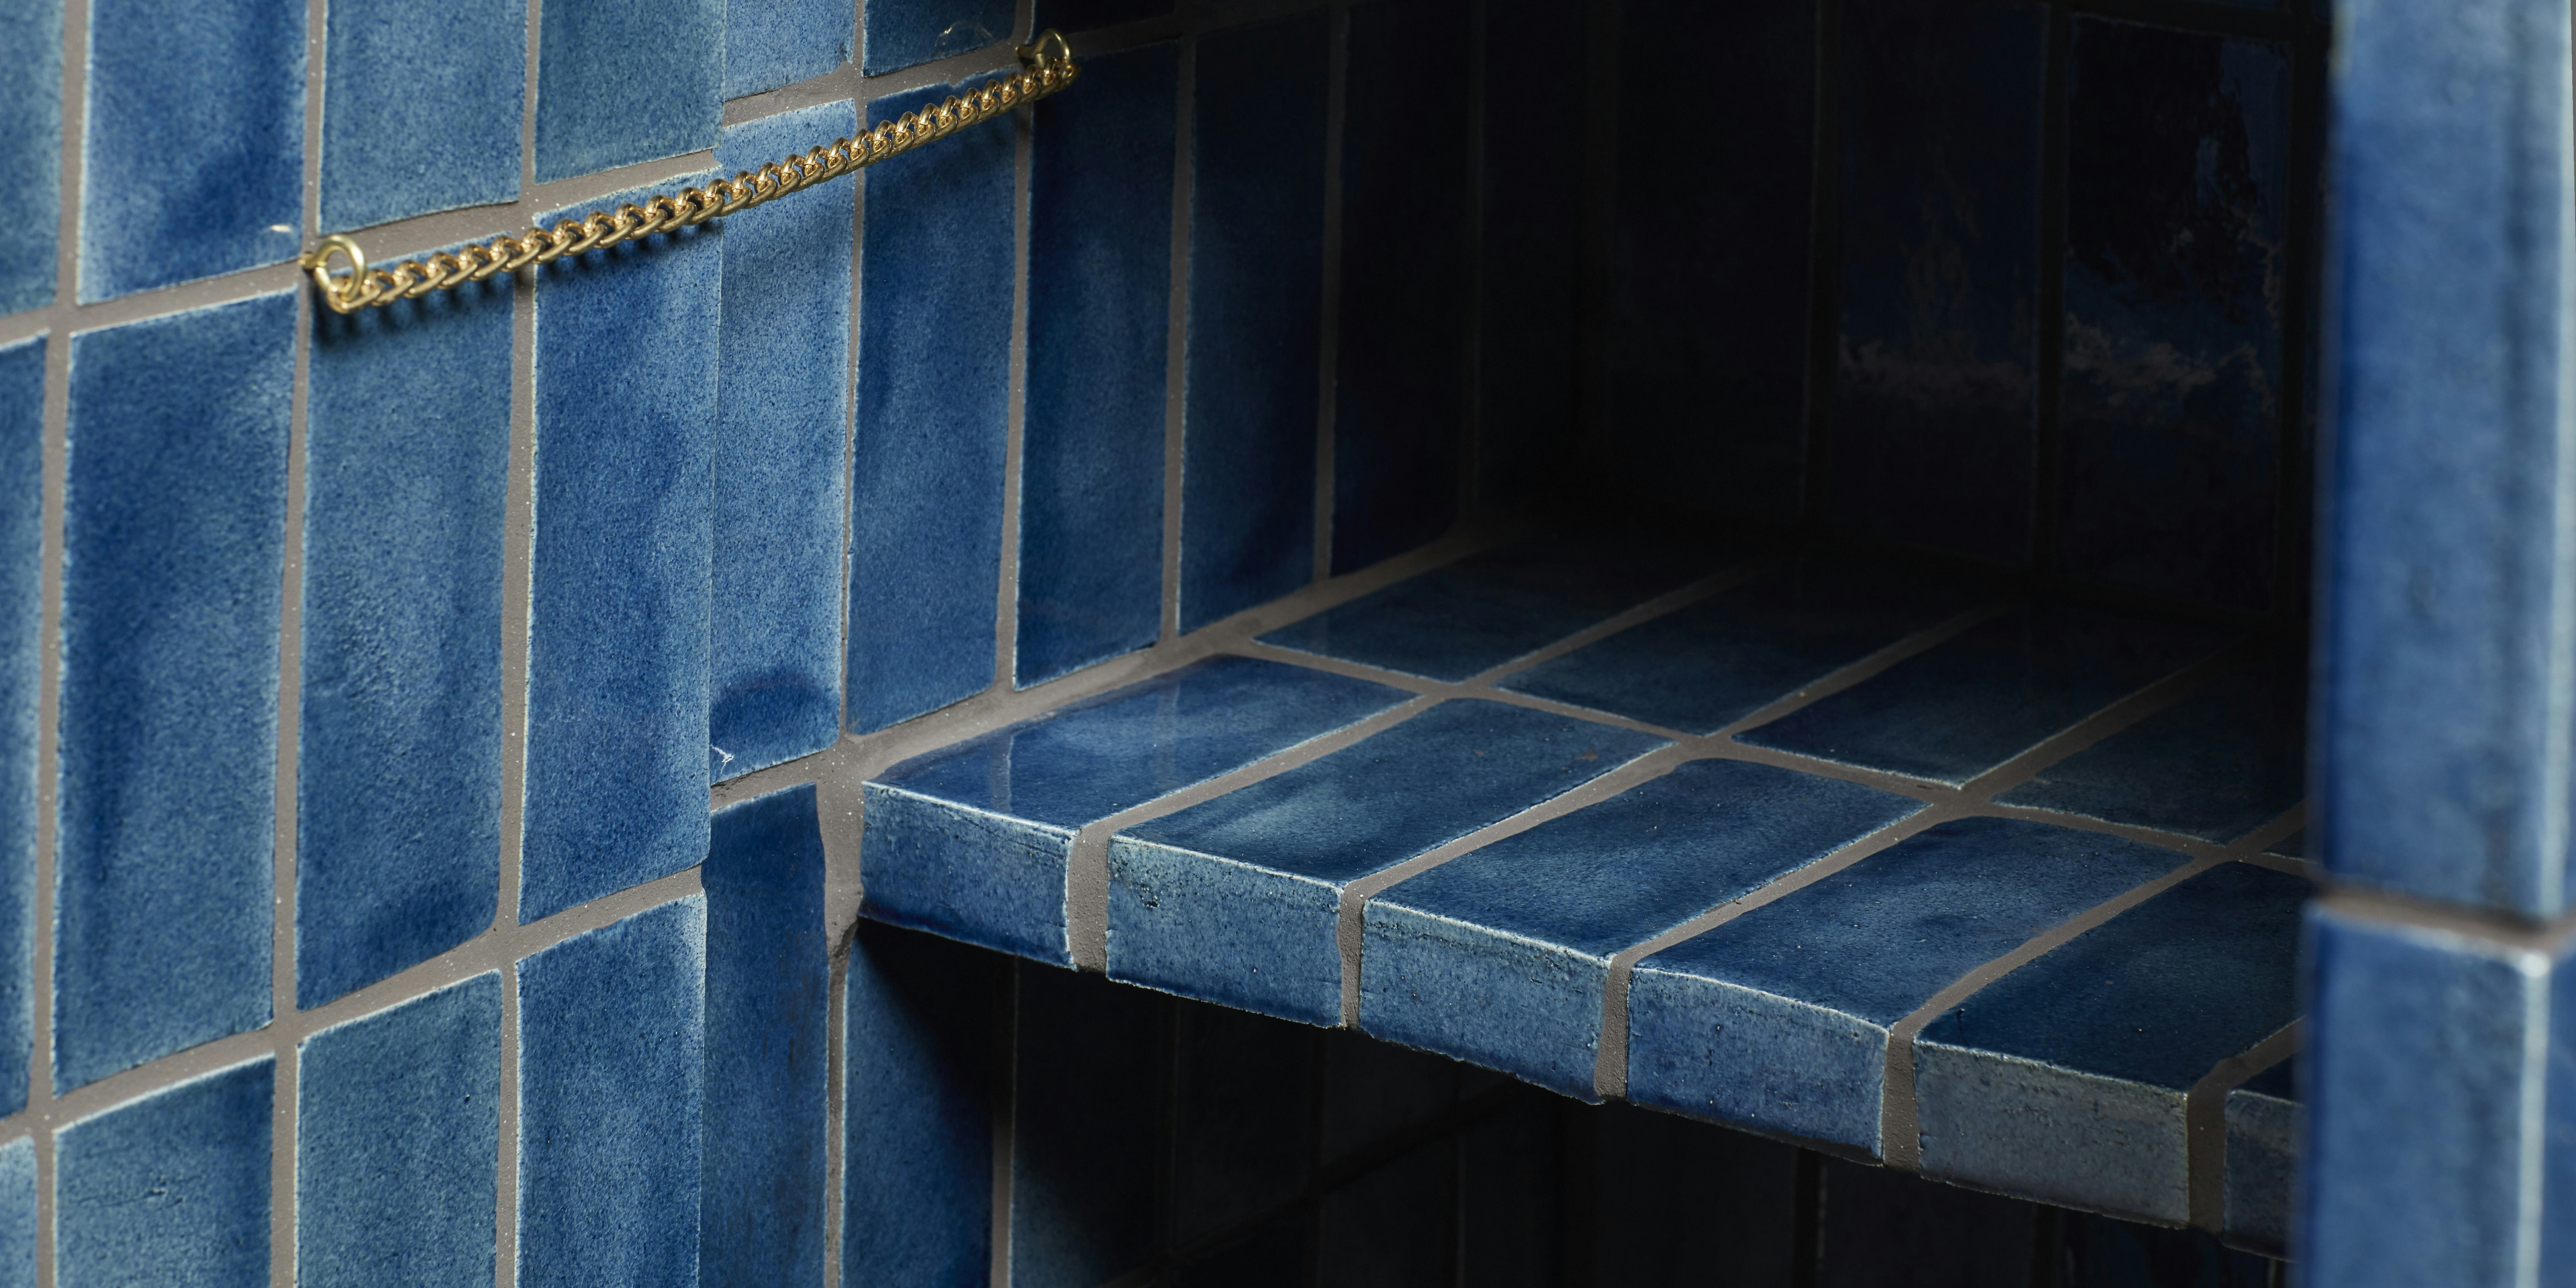 A detail of the inside of a sideboard clad in handmade blue tiles. A gold chain hangs between the inside of the sideboard and the door